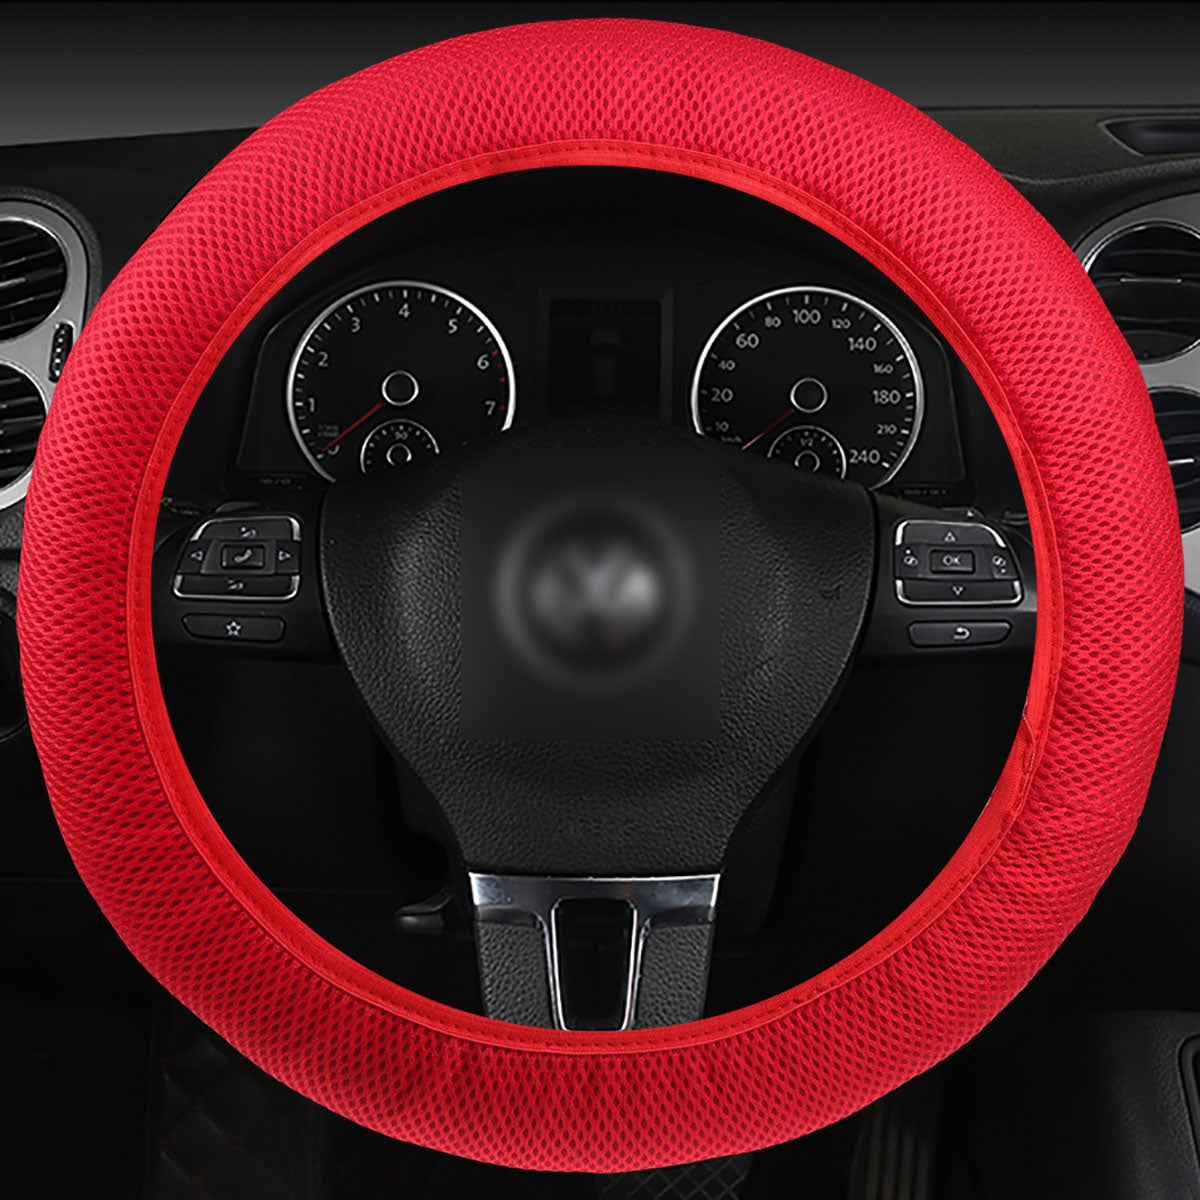 Car Accessory Steering Wheel Covers Protector Universial Luxury w/ Shoulder Pads - Auto GoShop